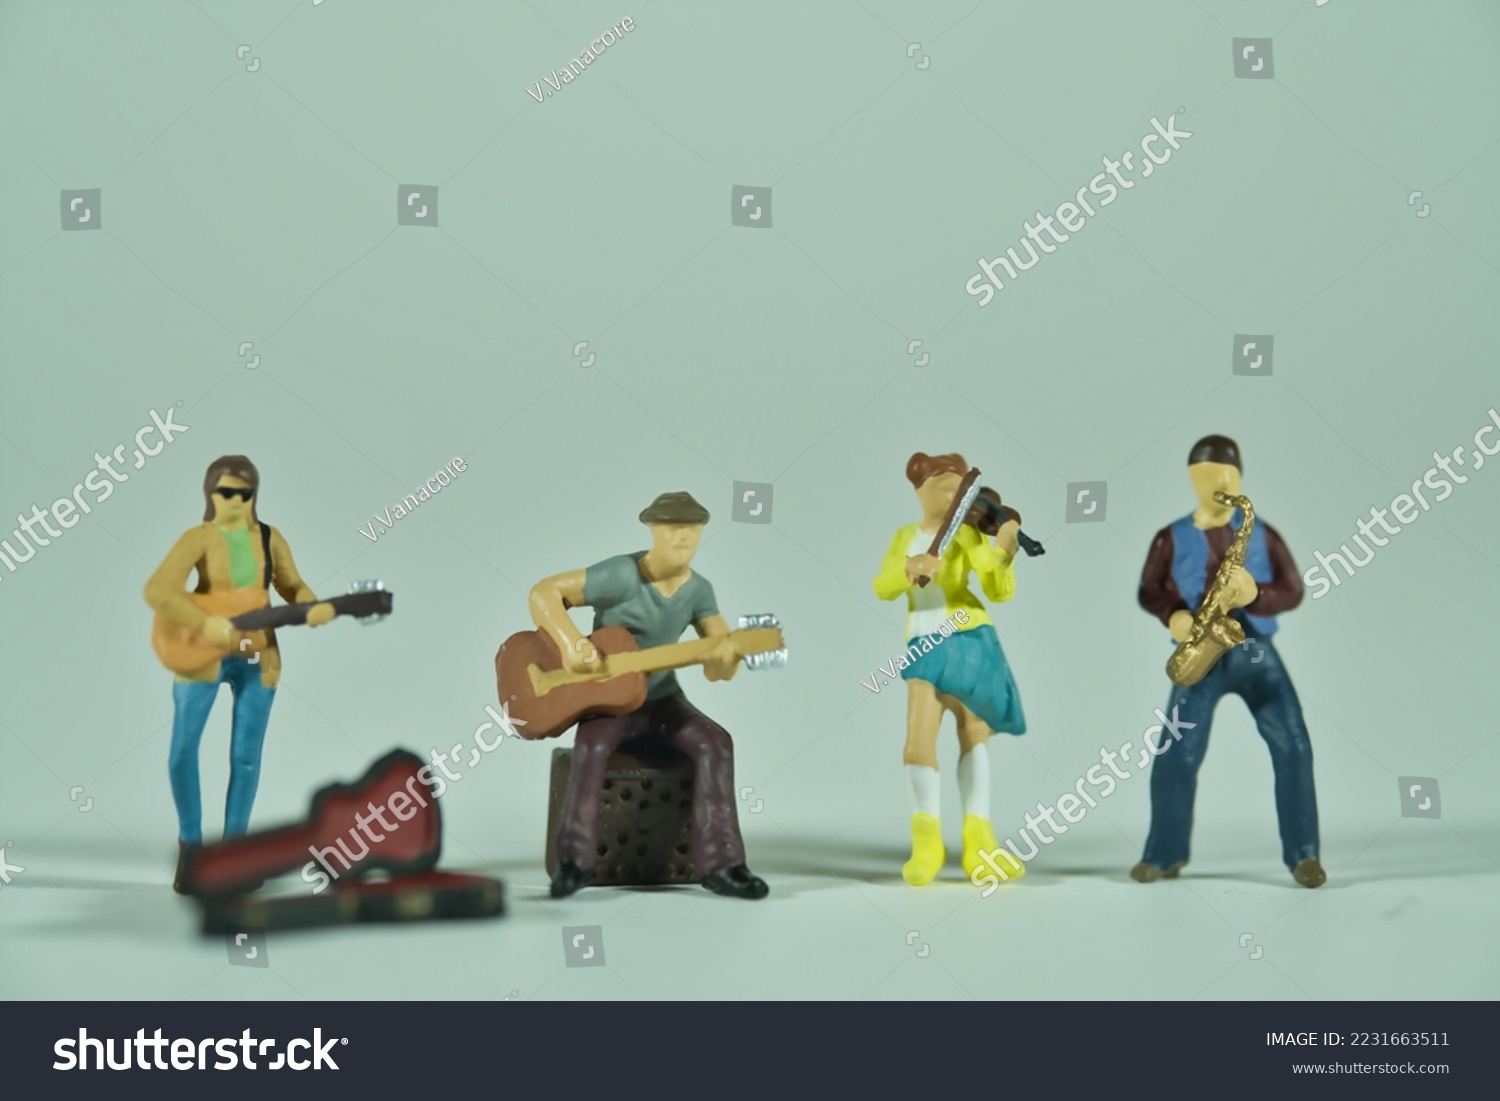 music band playing music, isolated on light background #2231663511